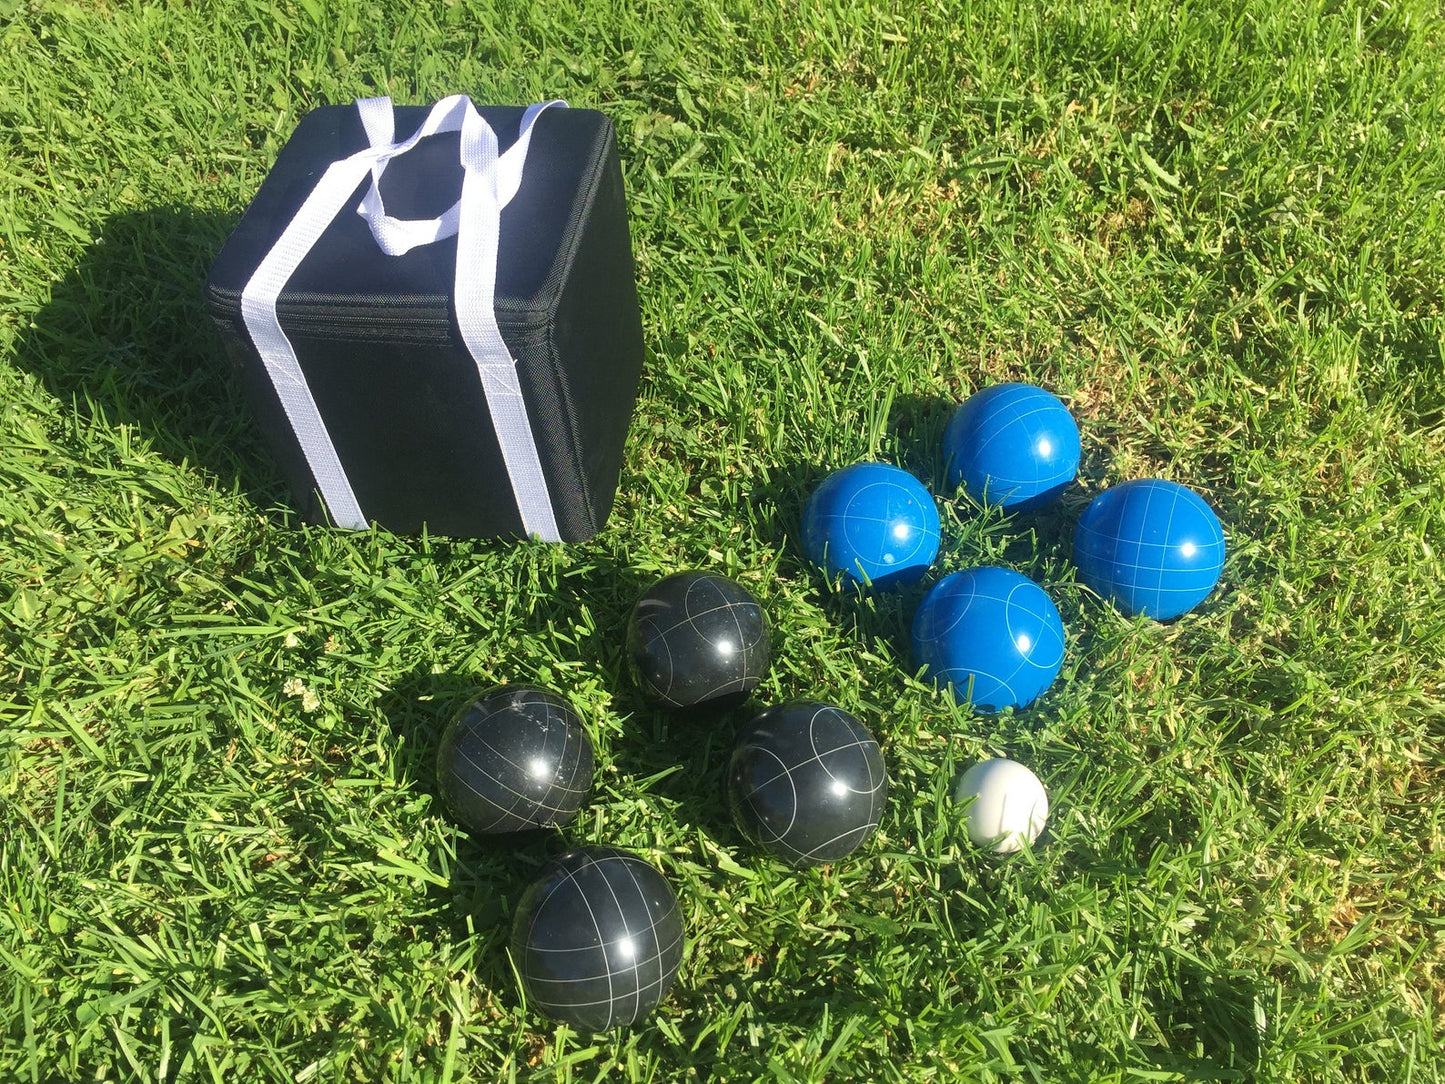 107mm Bocce Blue and Black Balls with Black Bag